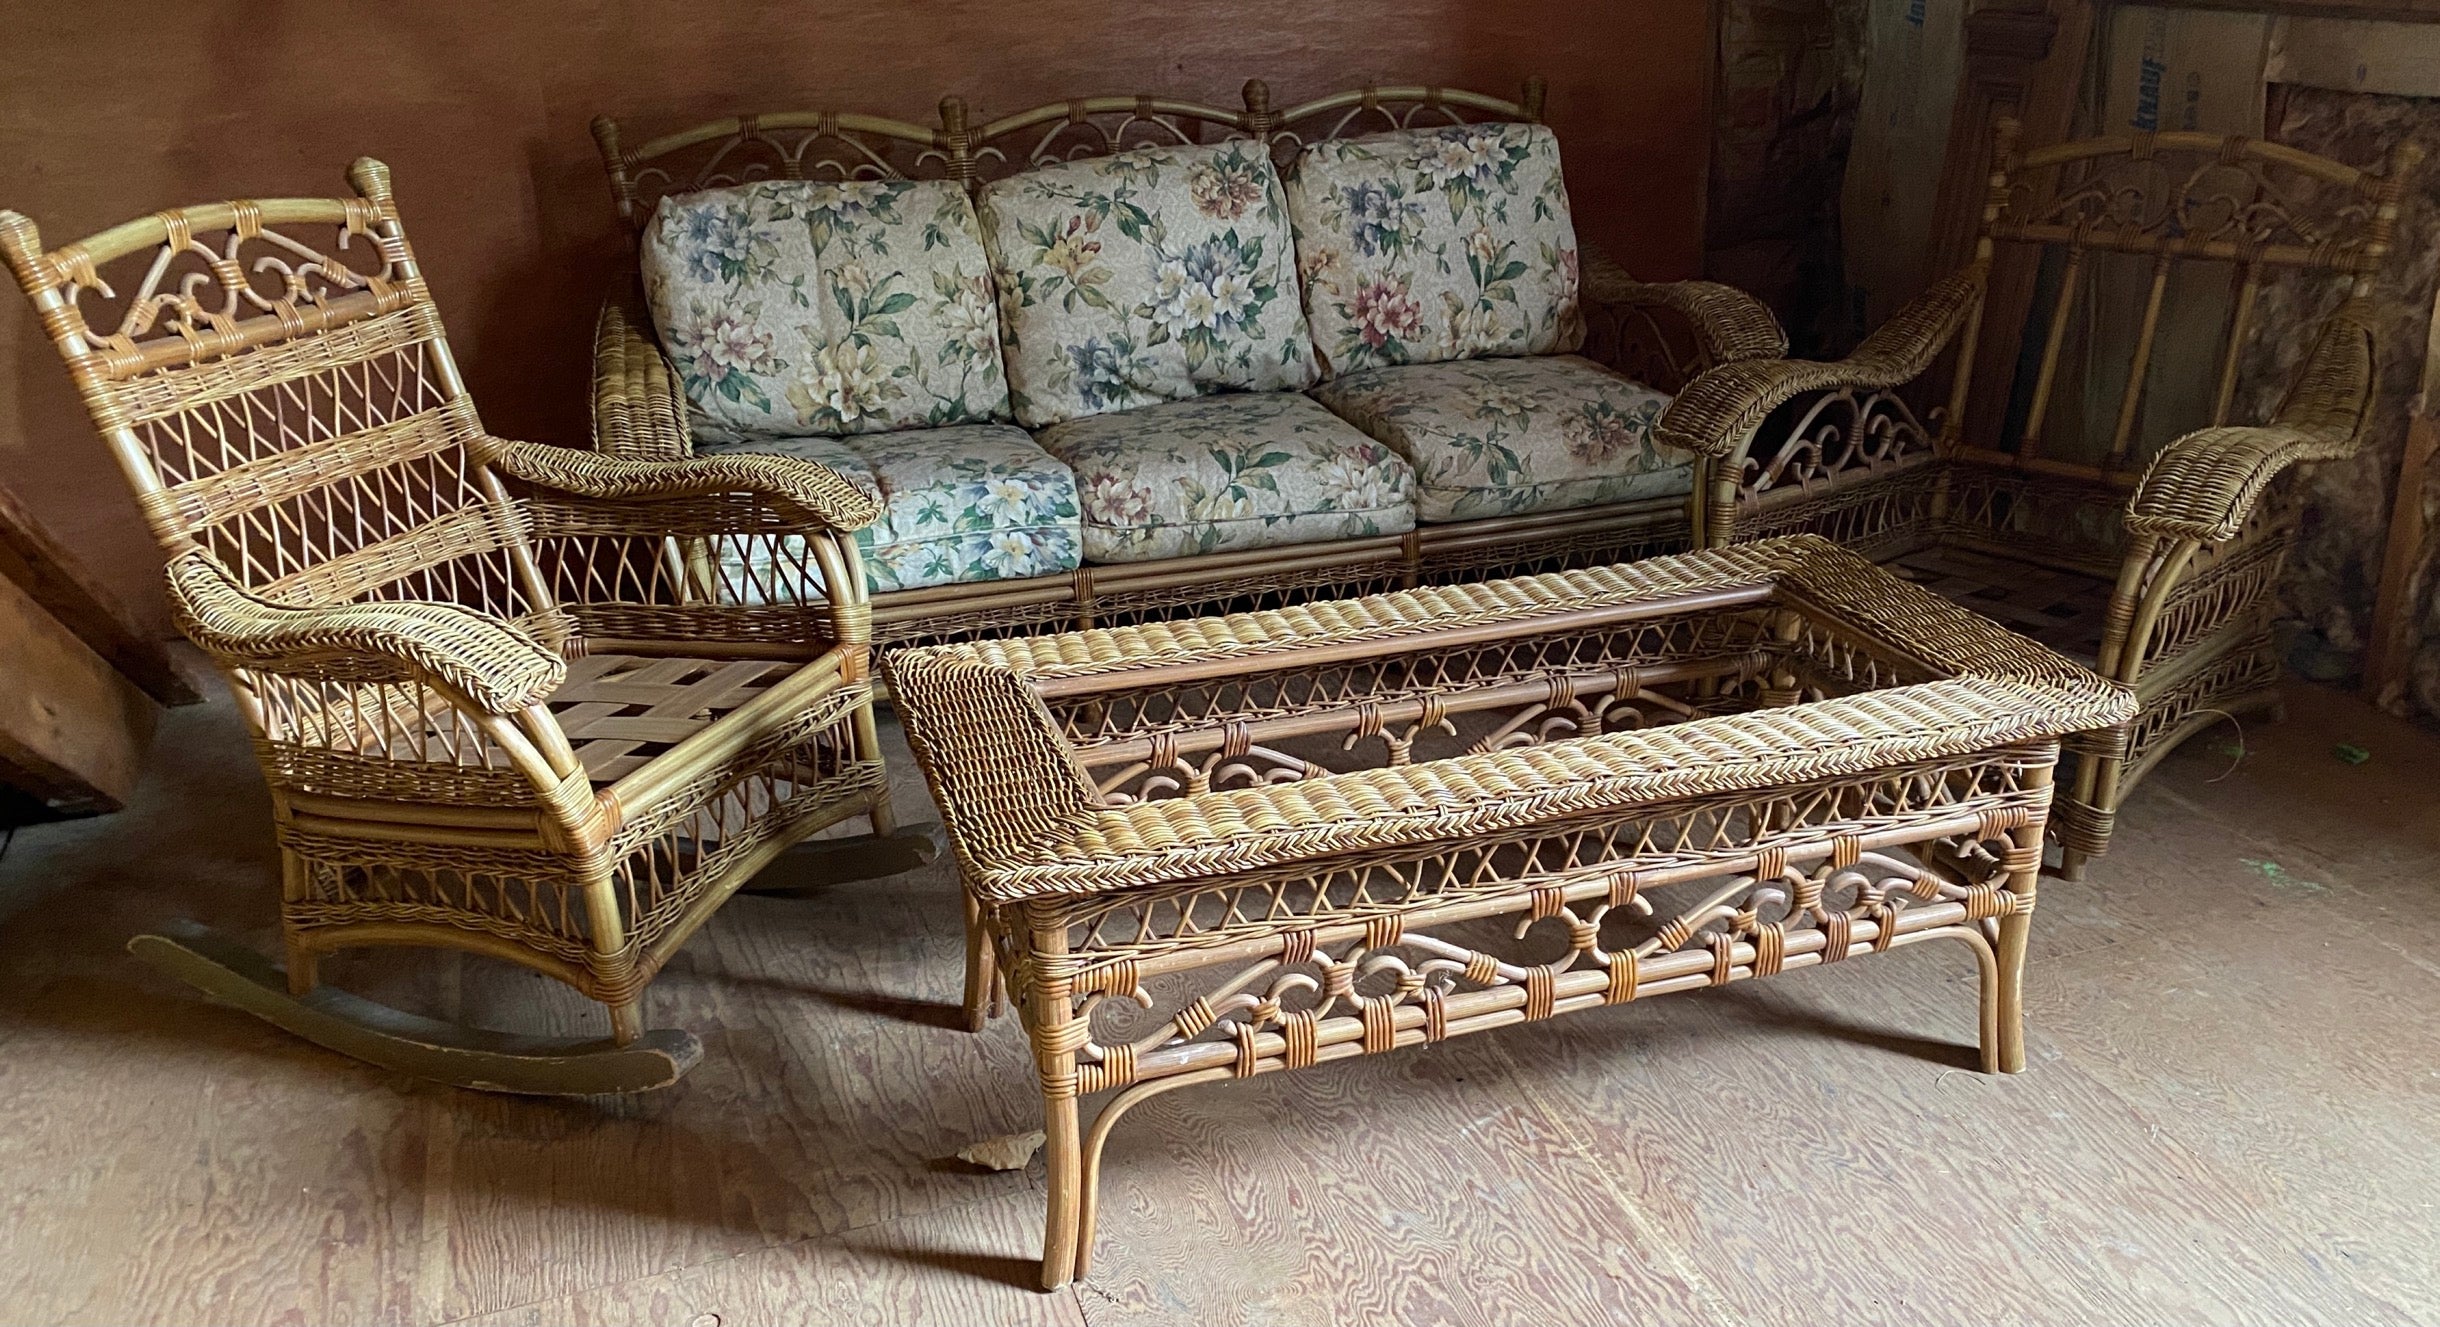 A rare find -- An American Victorian (5) piece wicker porch seating set including: sofa, matching rocking chair, arm chair with ottoman and glass top coffee table.
Cushions available as show for sofa only. Glass top may be missing but we will